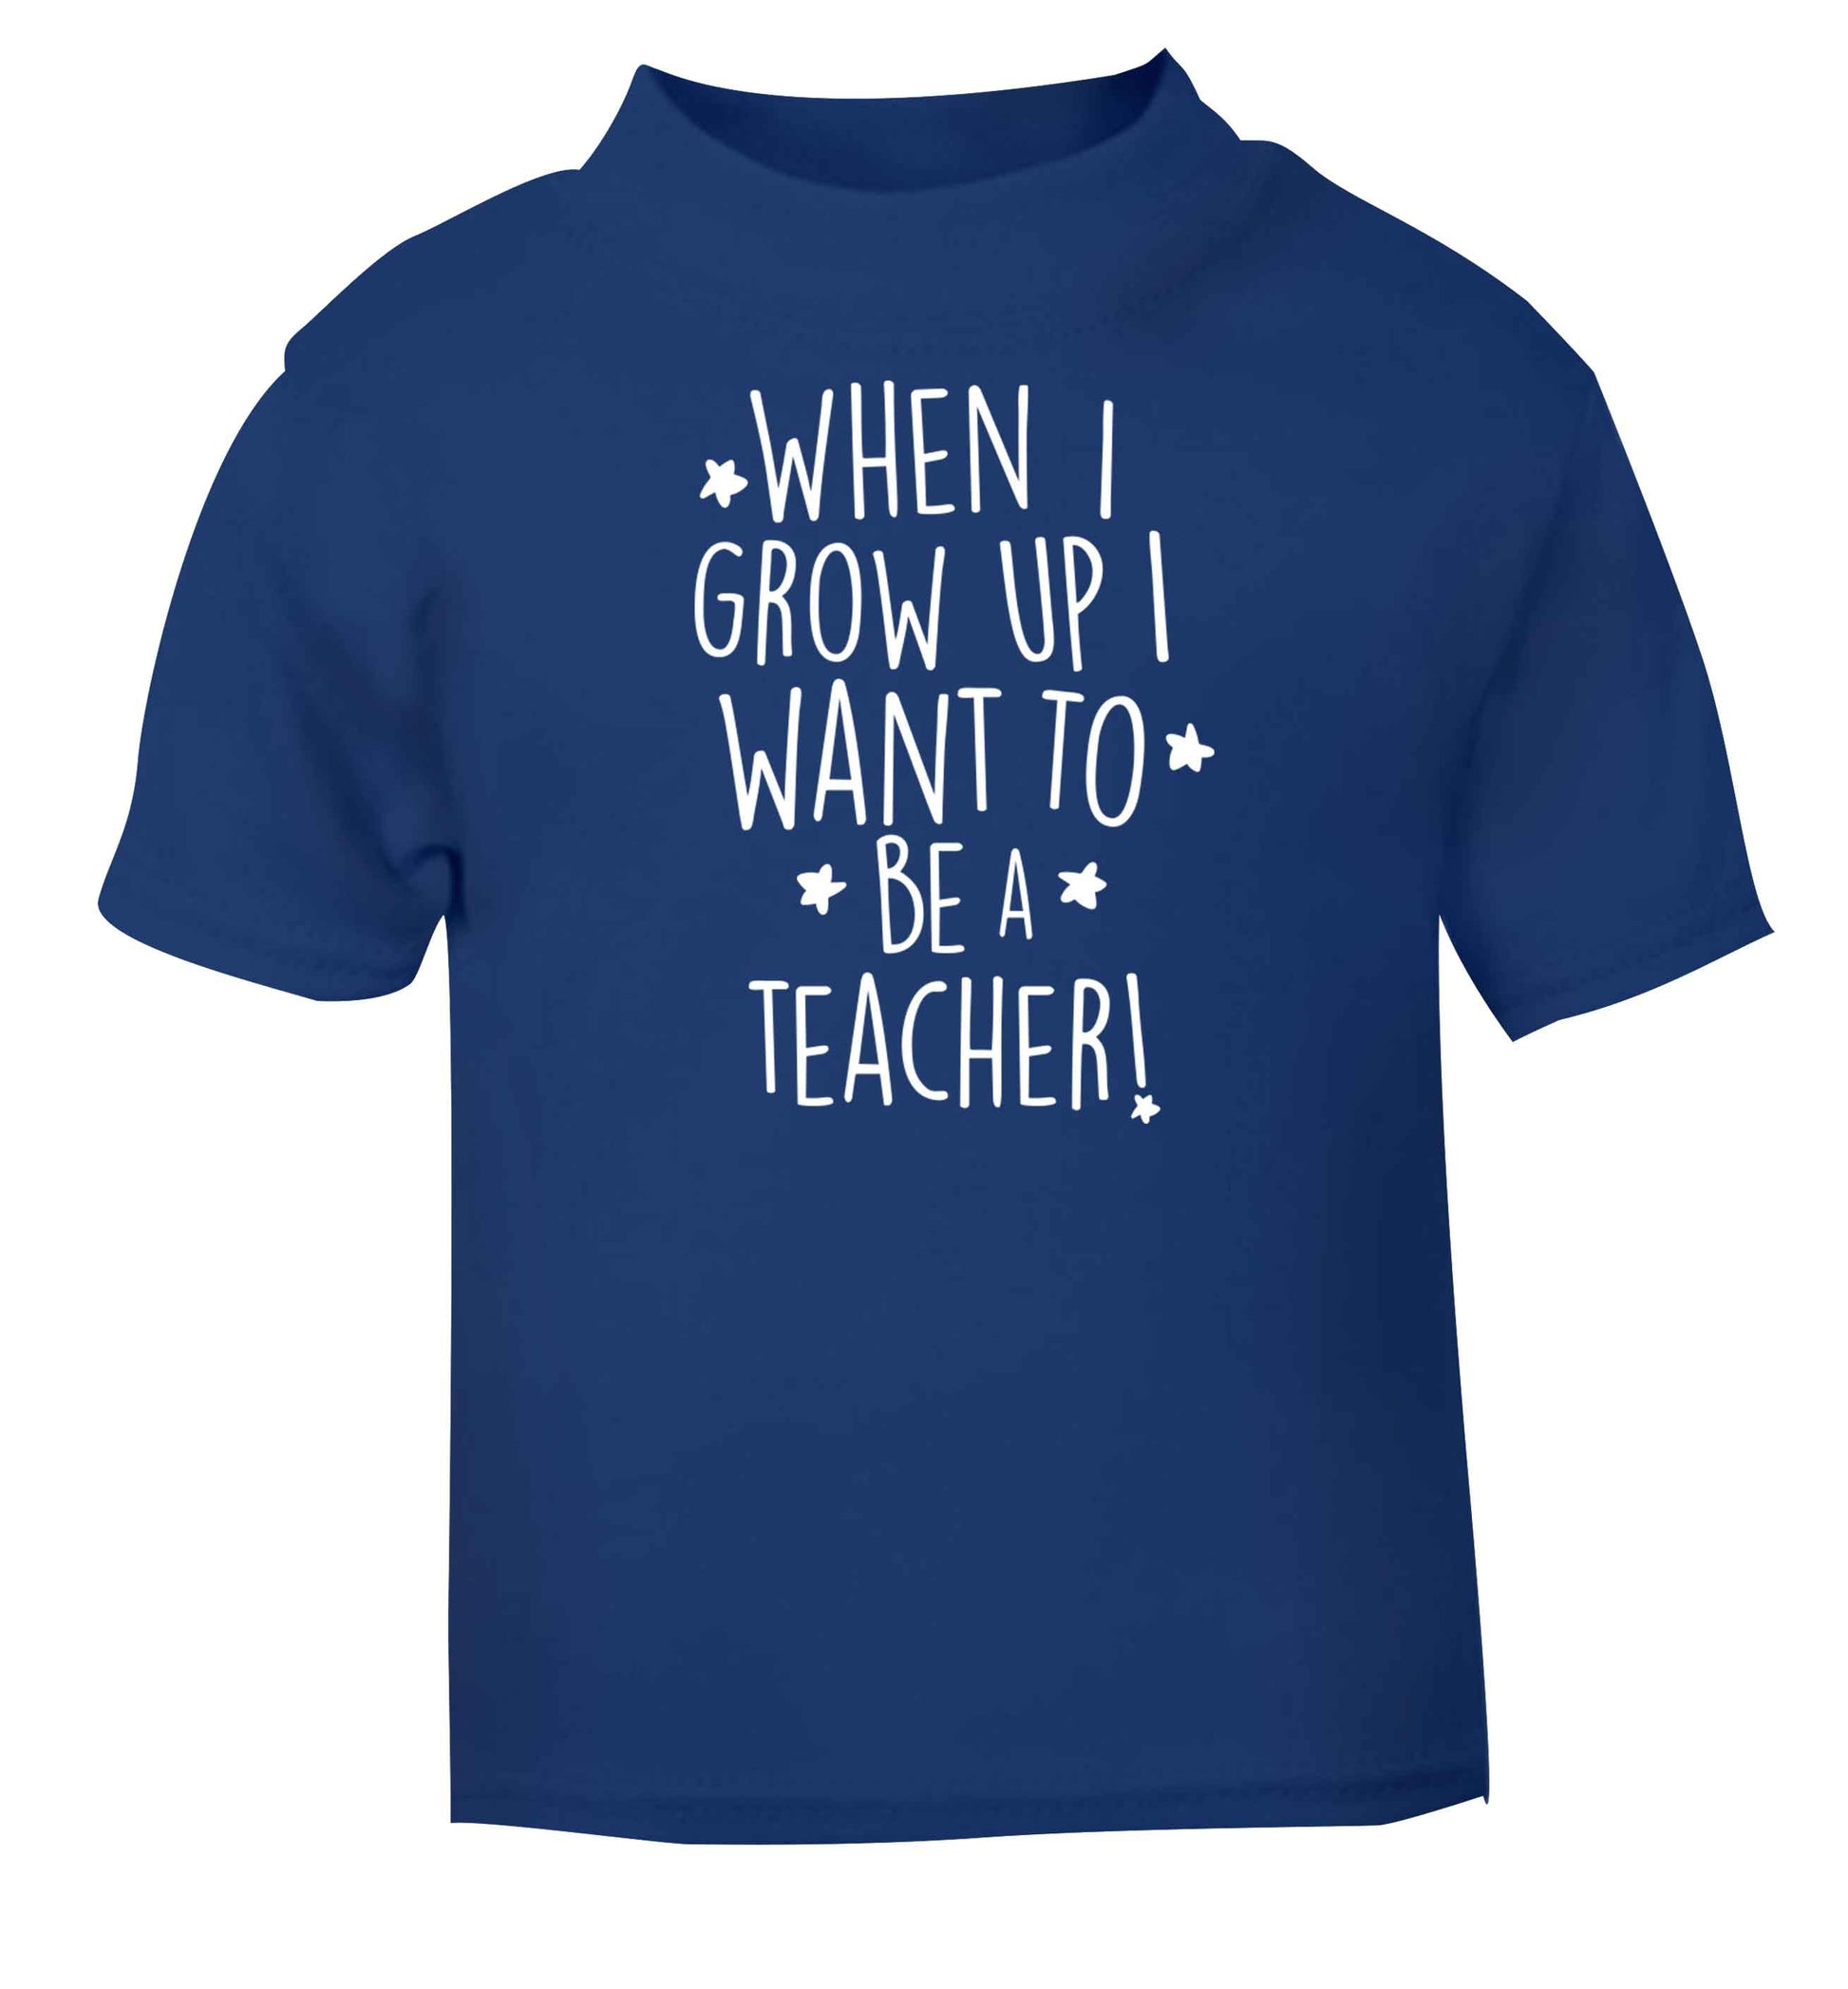 When I grow up I want to be a teacher blue baby toddler Tshirt 2 Years